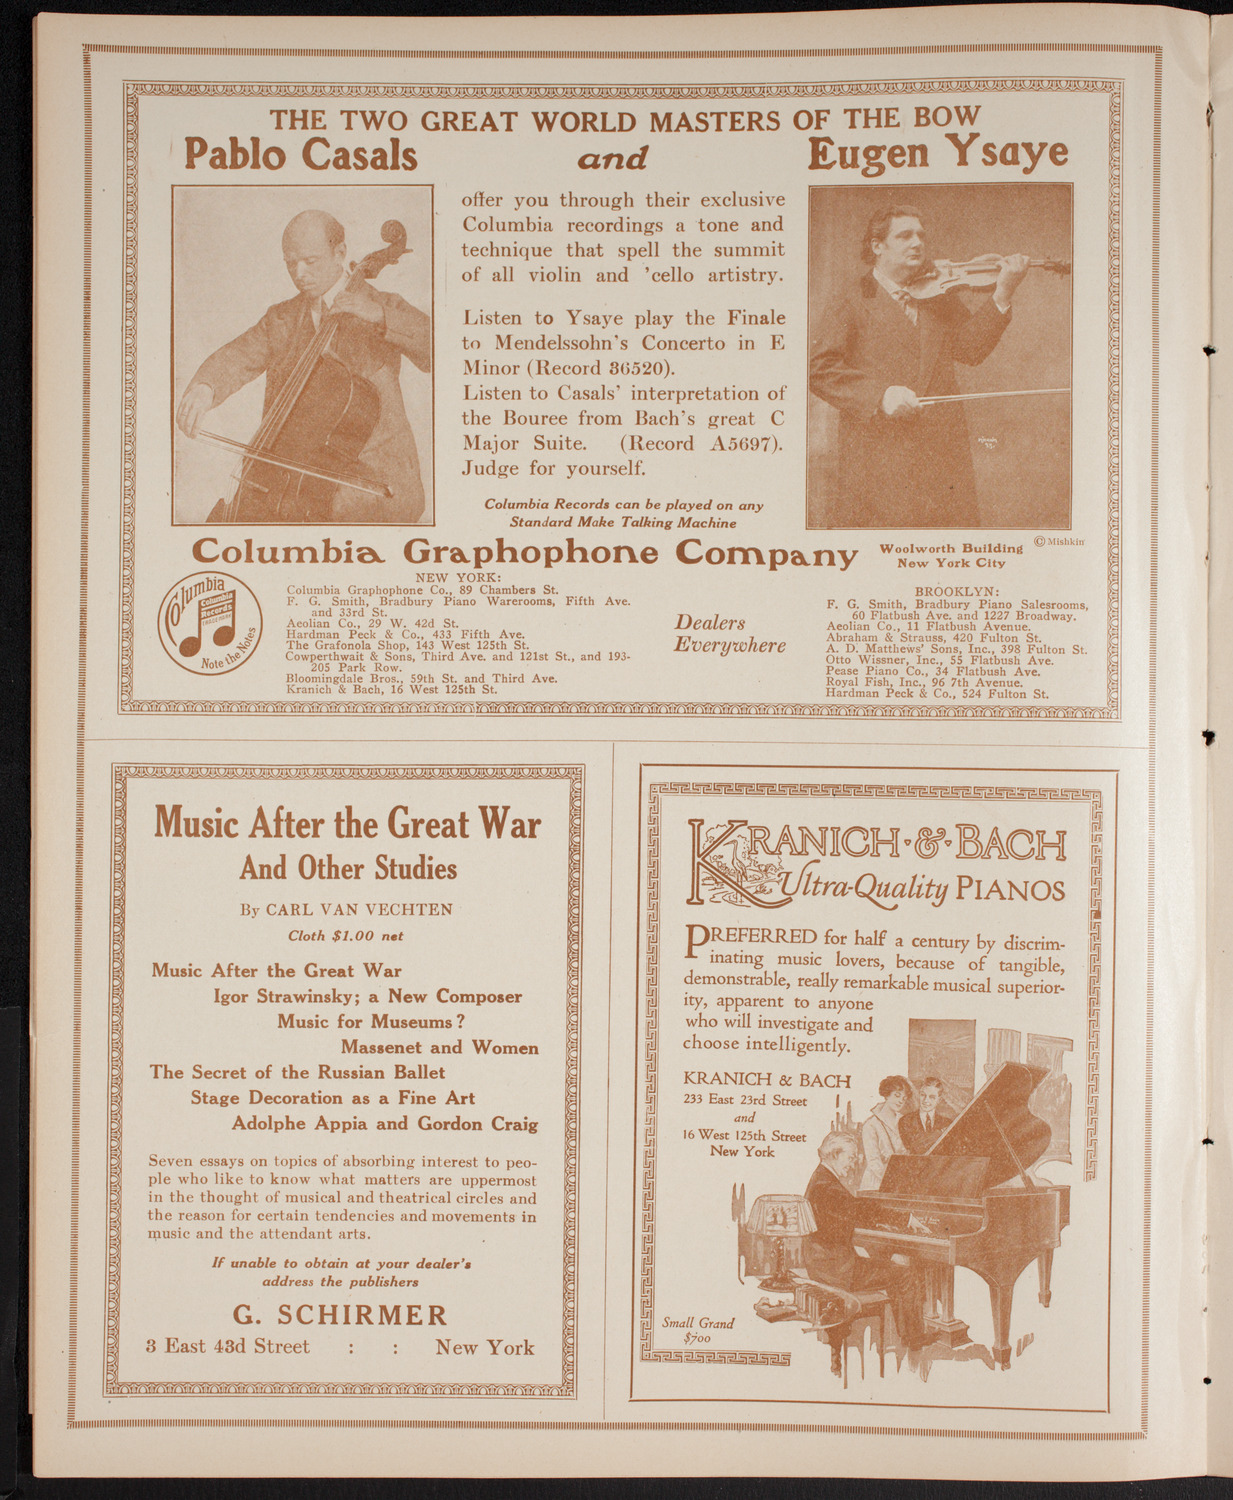 Orchestral Society of New York, January 1, 1916, program page 6